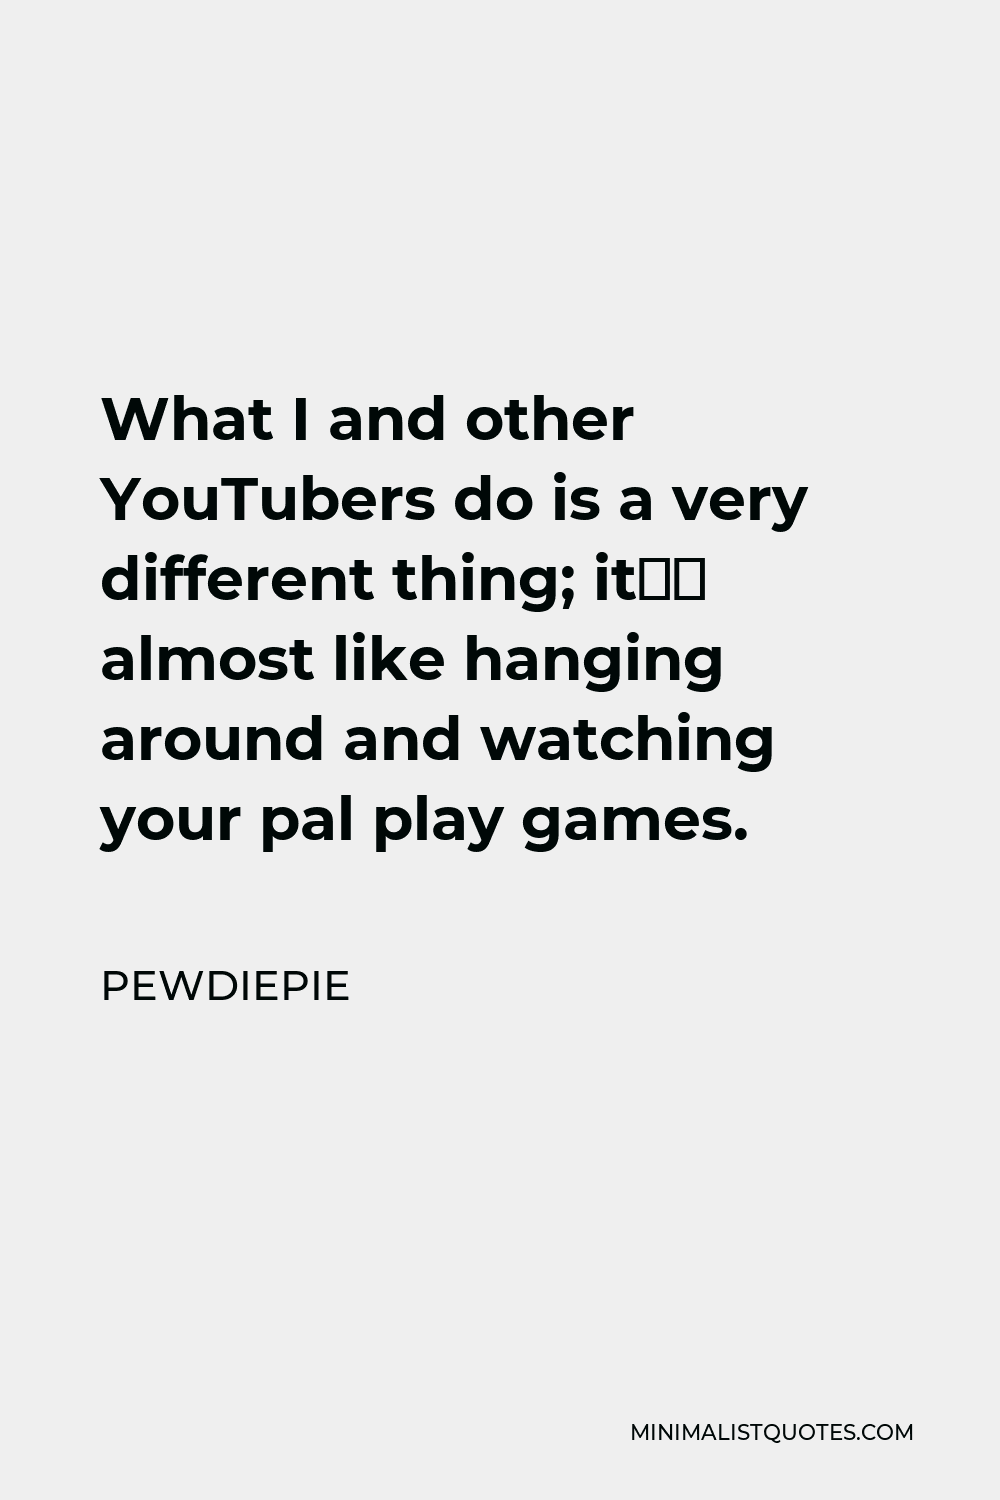 PewDiePie Quote - What I and other YouTubers do is a very different thing; it’s almost like hanging around and watching your pal play games.